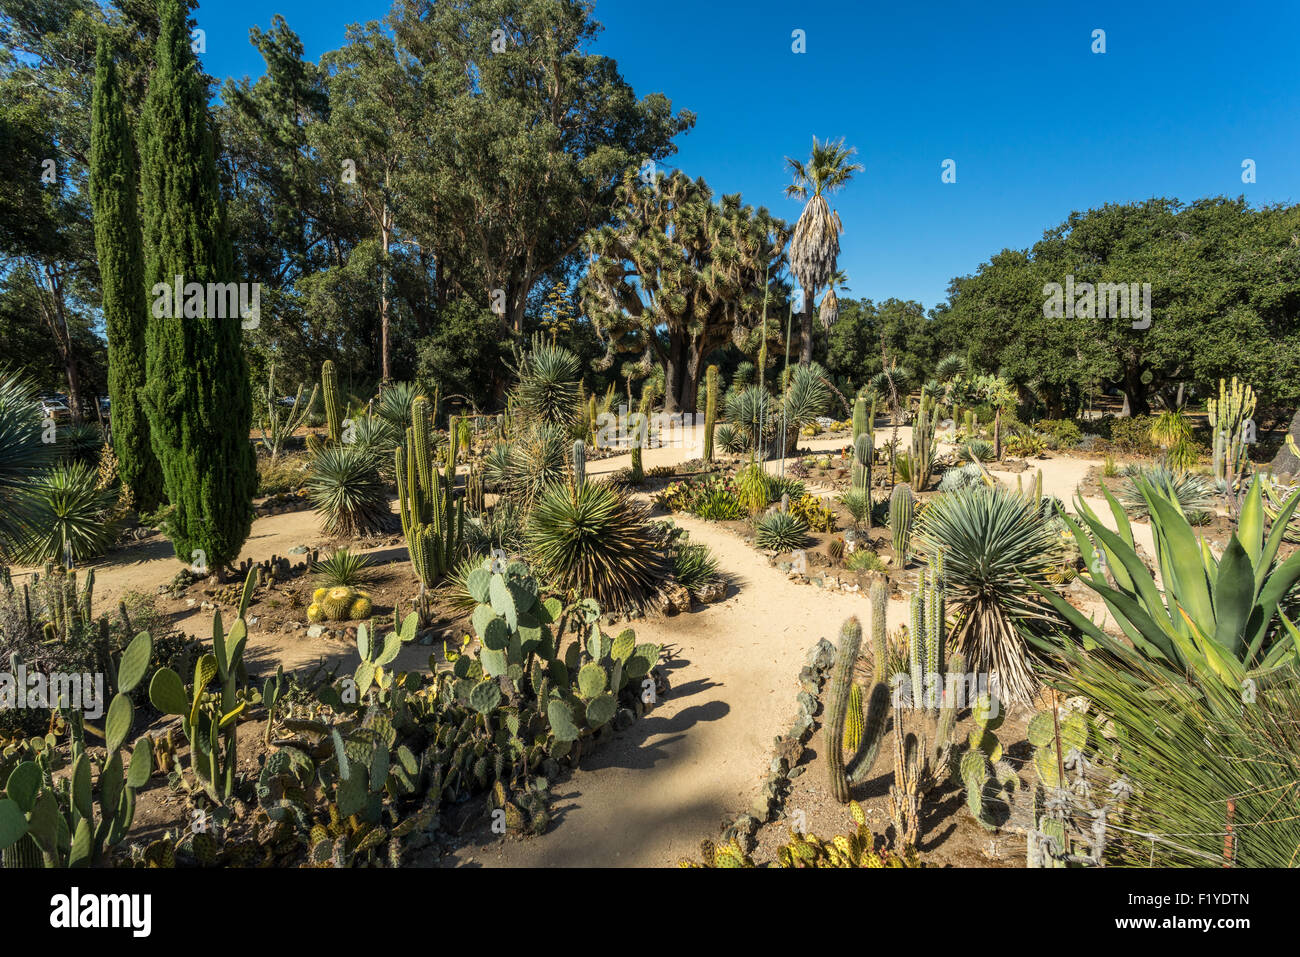 The Arizona Cactus Garden Or Refered To As The Stanford Cactus